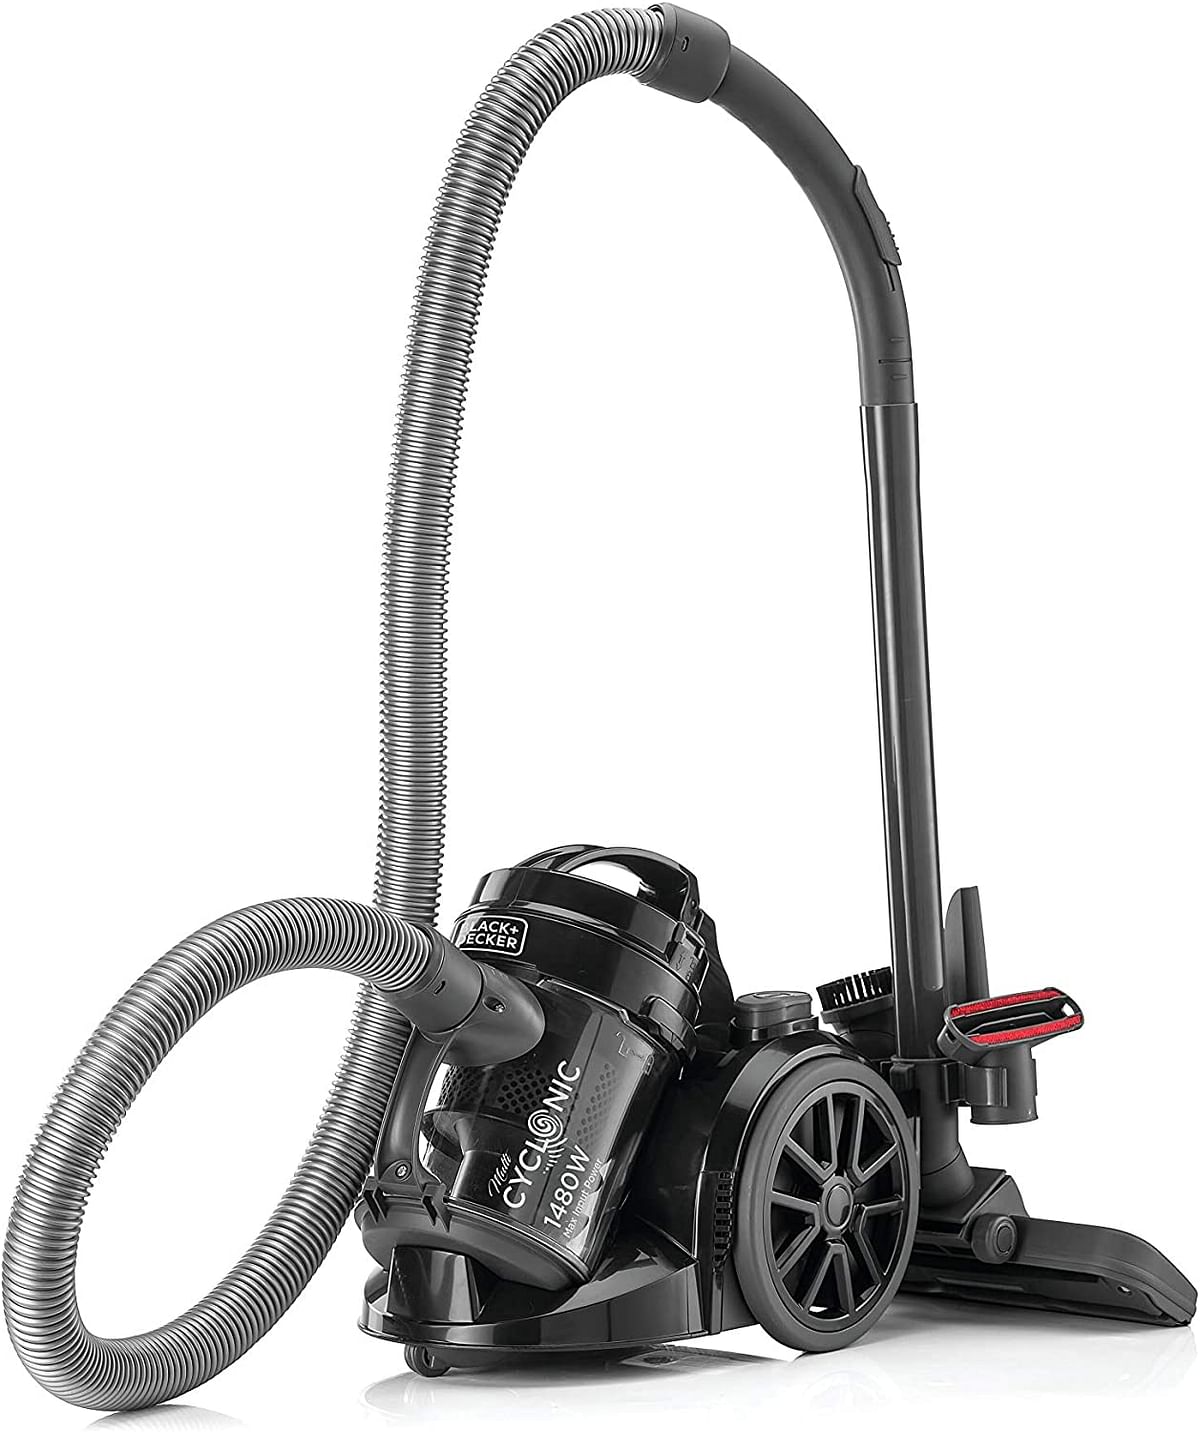 BLACK+DECKER 1480W 1.8L Corded Vacuum Cleaner 18KPa Suction Power Multi-Cyclonic Bagless Vacuum with 6 Stage Filtration, 1.5M 360-degree Swivel Hose And Washable Filter VM1480-B5